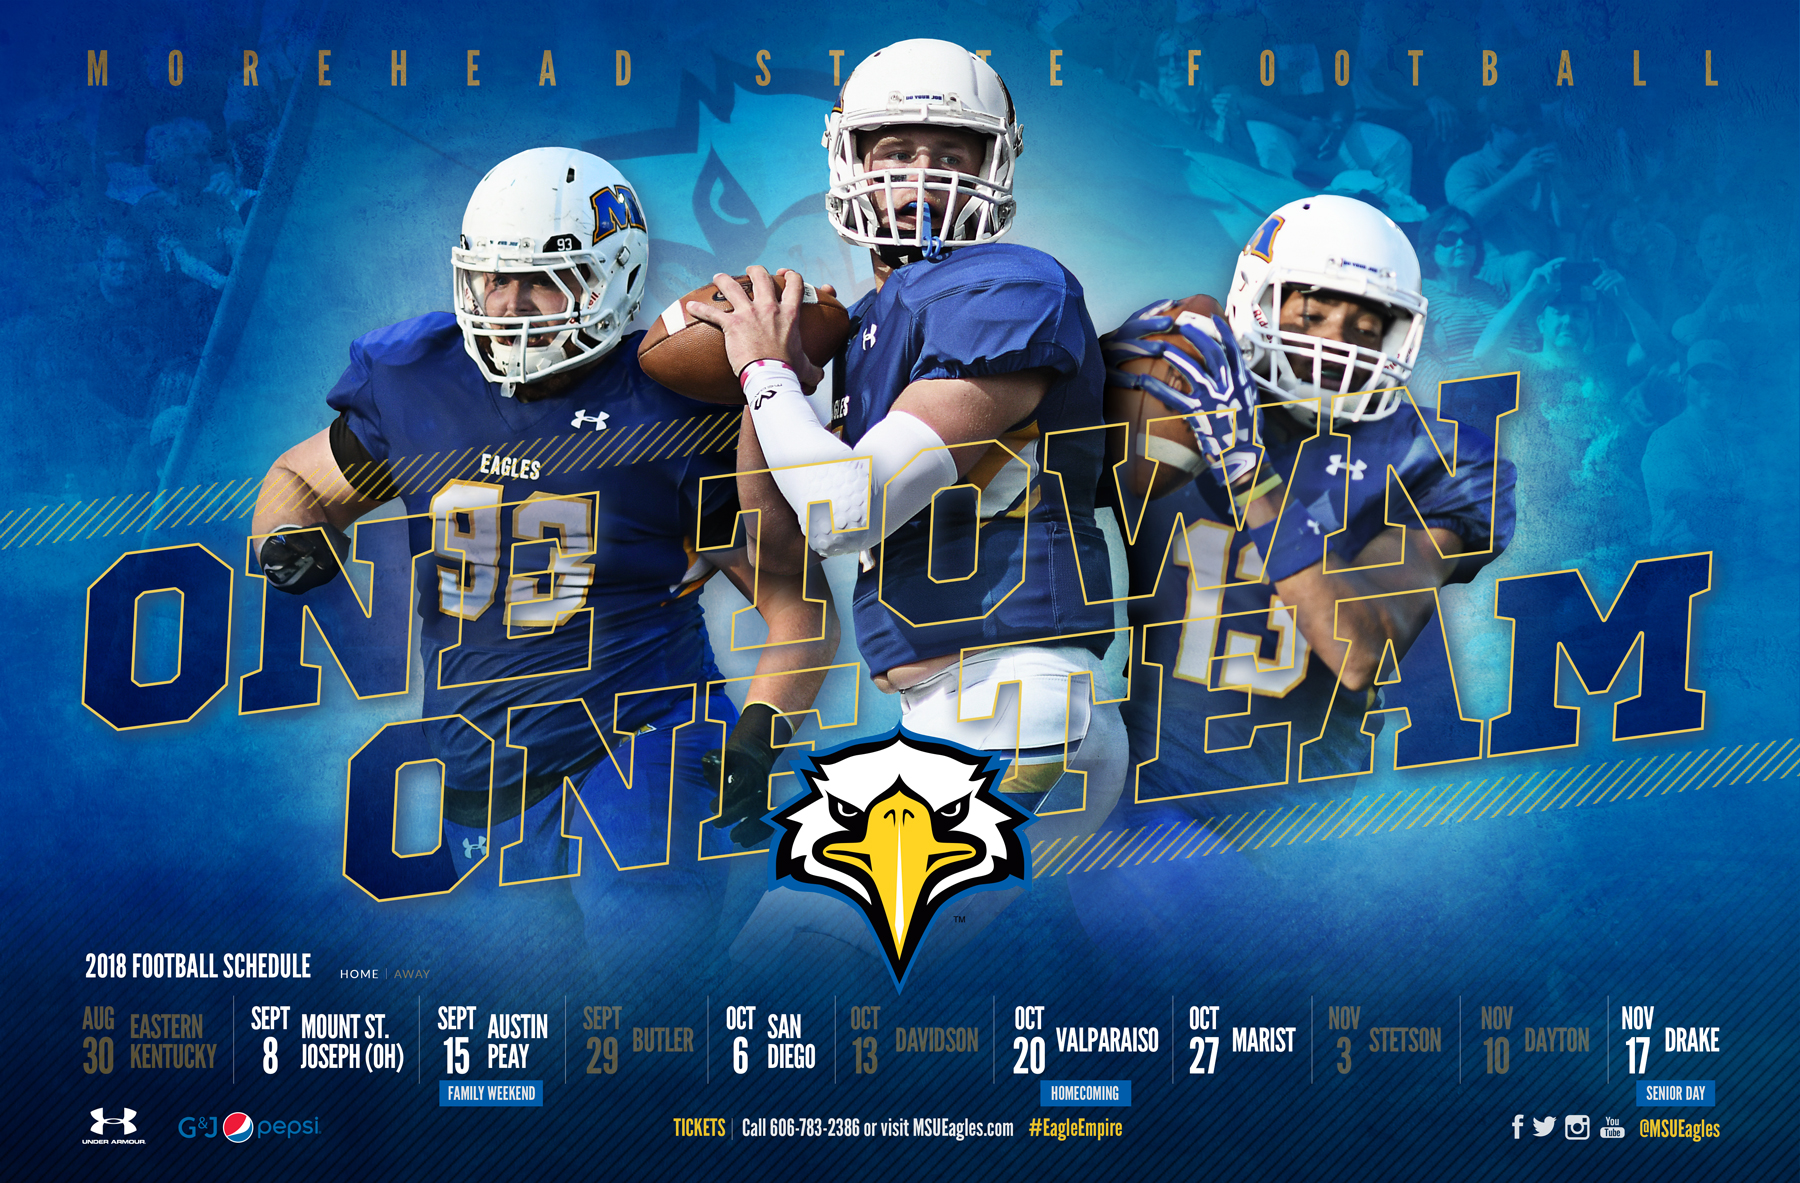 Morehead State spring football poster